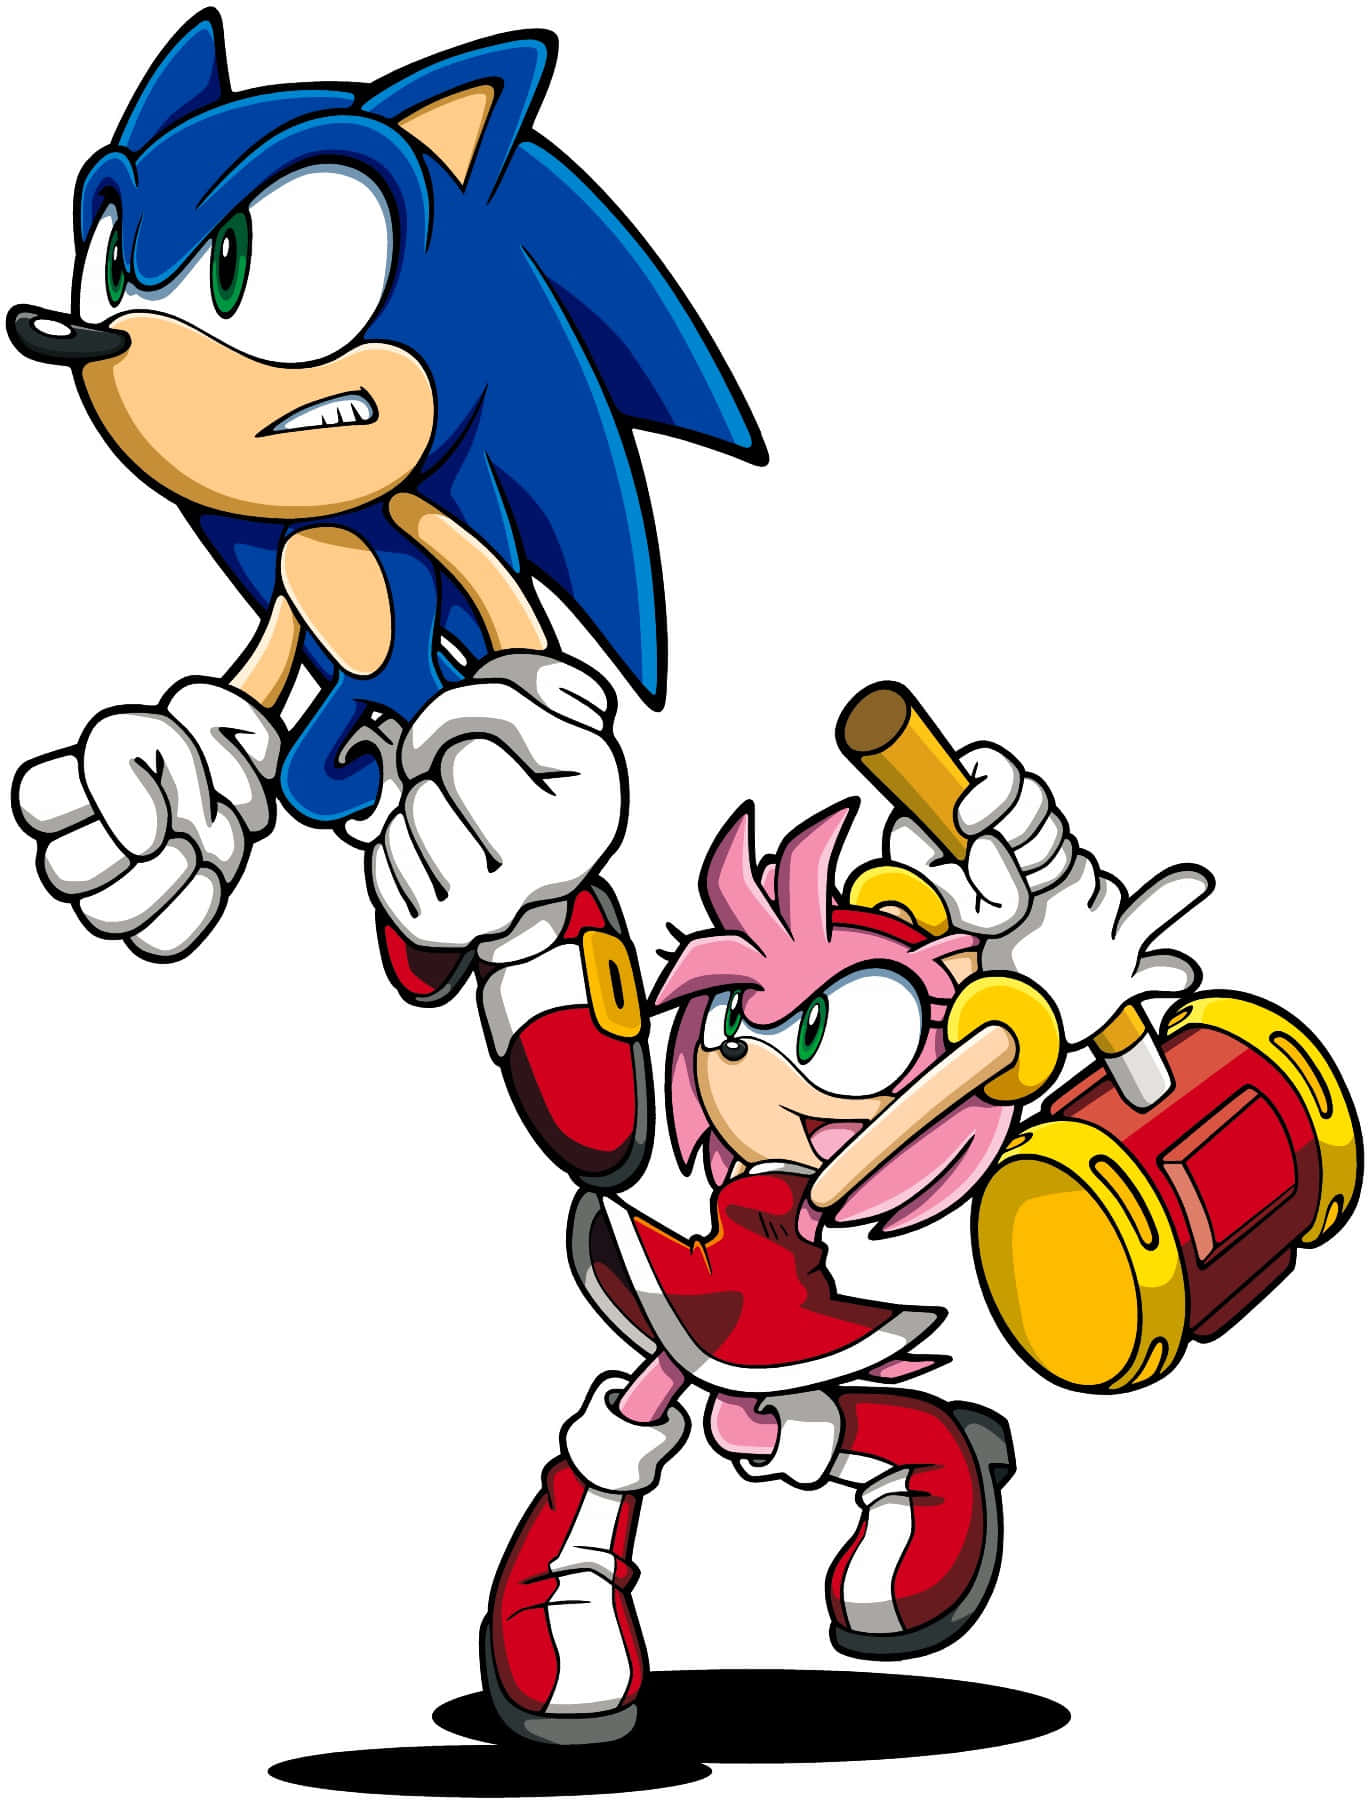 Beloved couple Sonic and Amy sharing a heartfelt moment Wallpaper